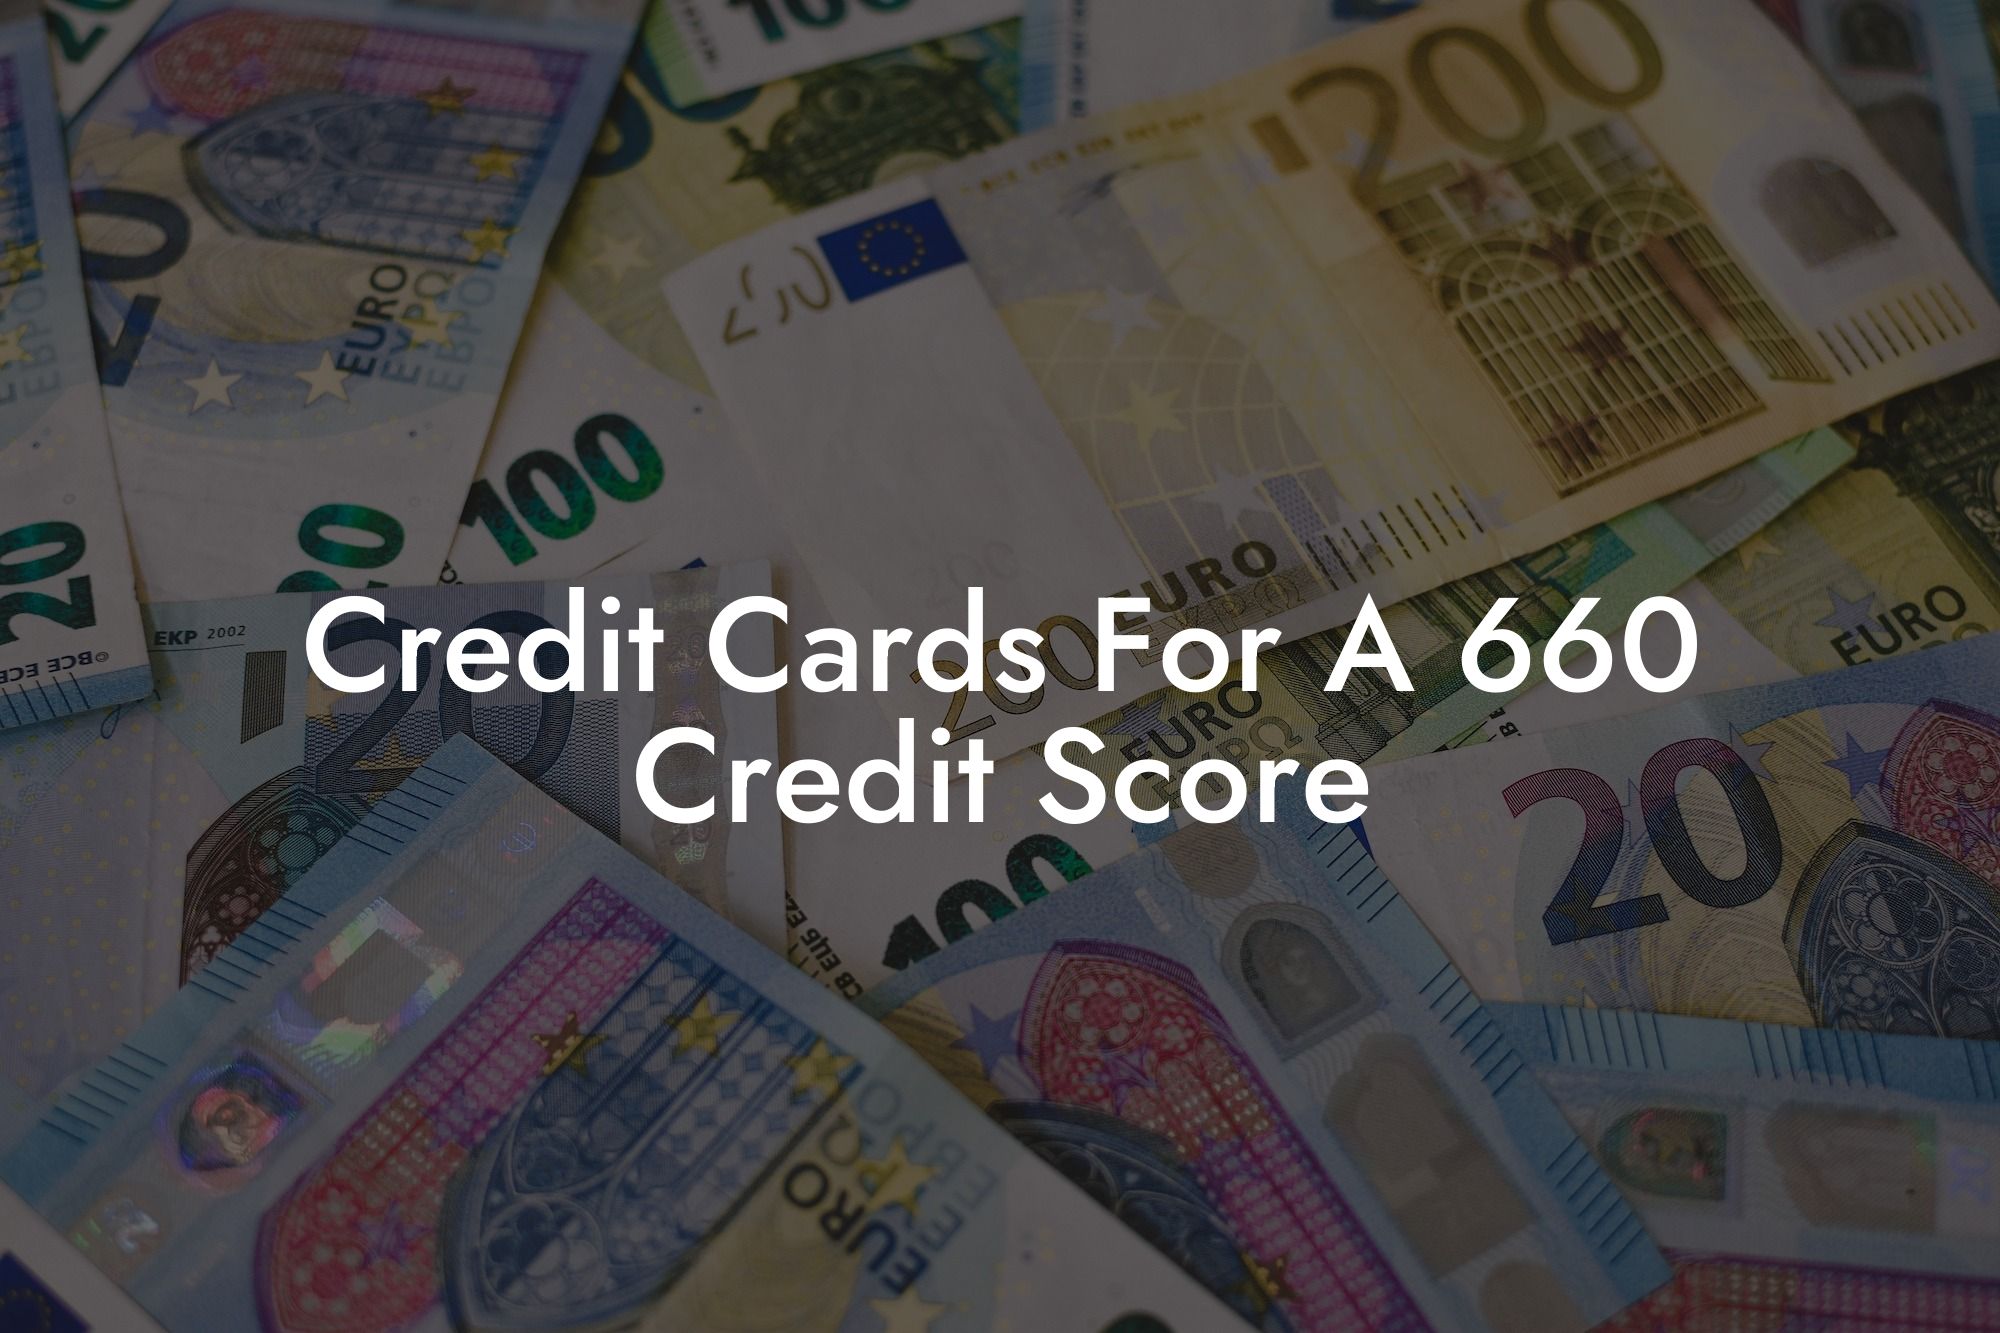 Credit Cards For A 660 Credit Score